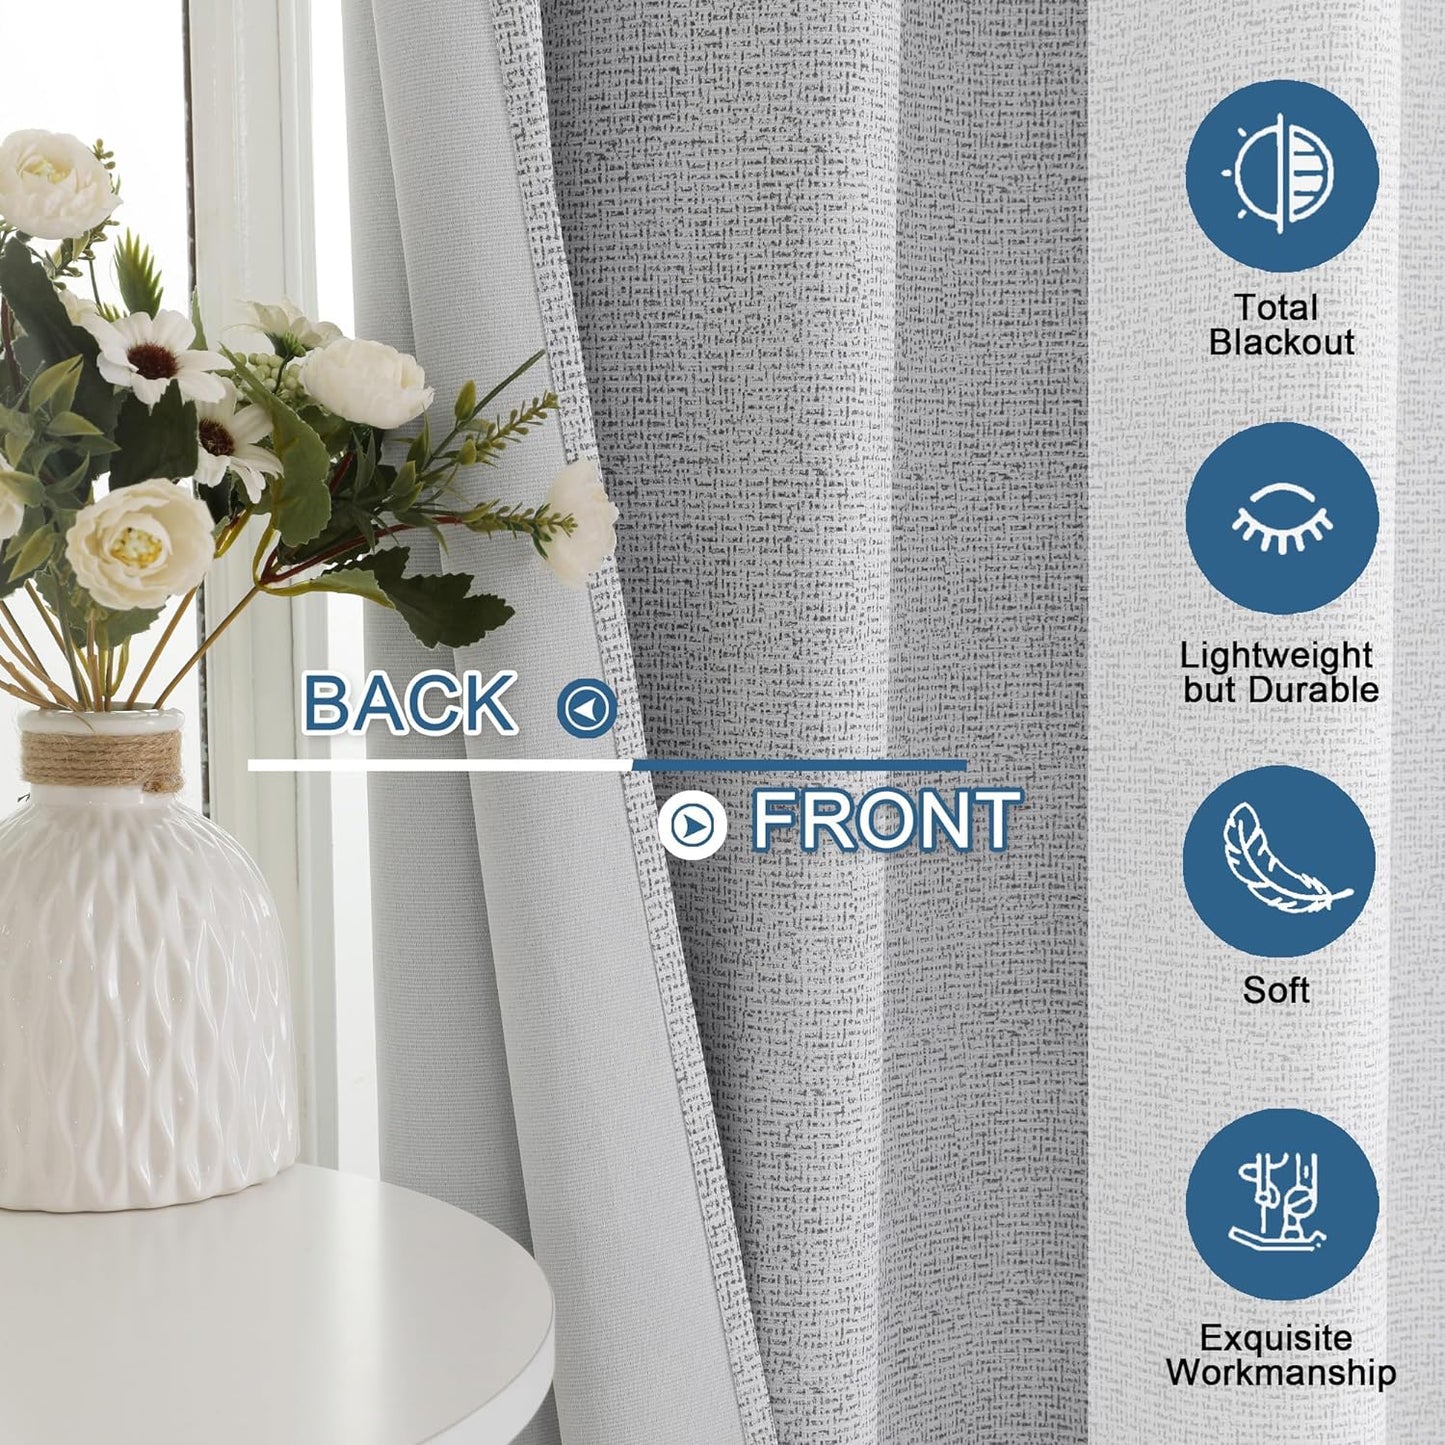 OWENIE Luke Black Out Curtains 63 Inch Long 2 Panels for Bedroom, Geometric Printed Completely Blackout Room Darkening Curtains, Grommet Thermal Insulated Living Room Curtain, 2 PCS, Each 42Wx63L Inch  OWENIE   